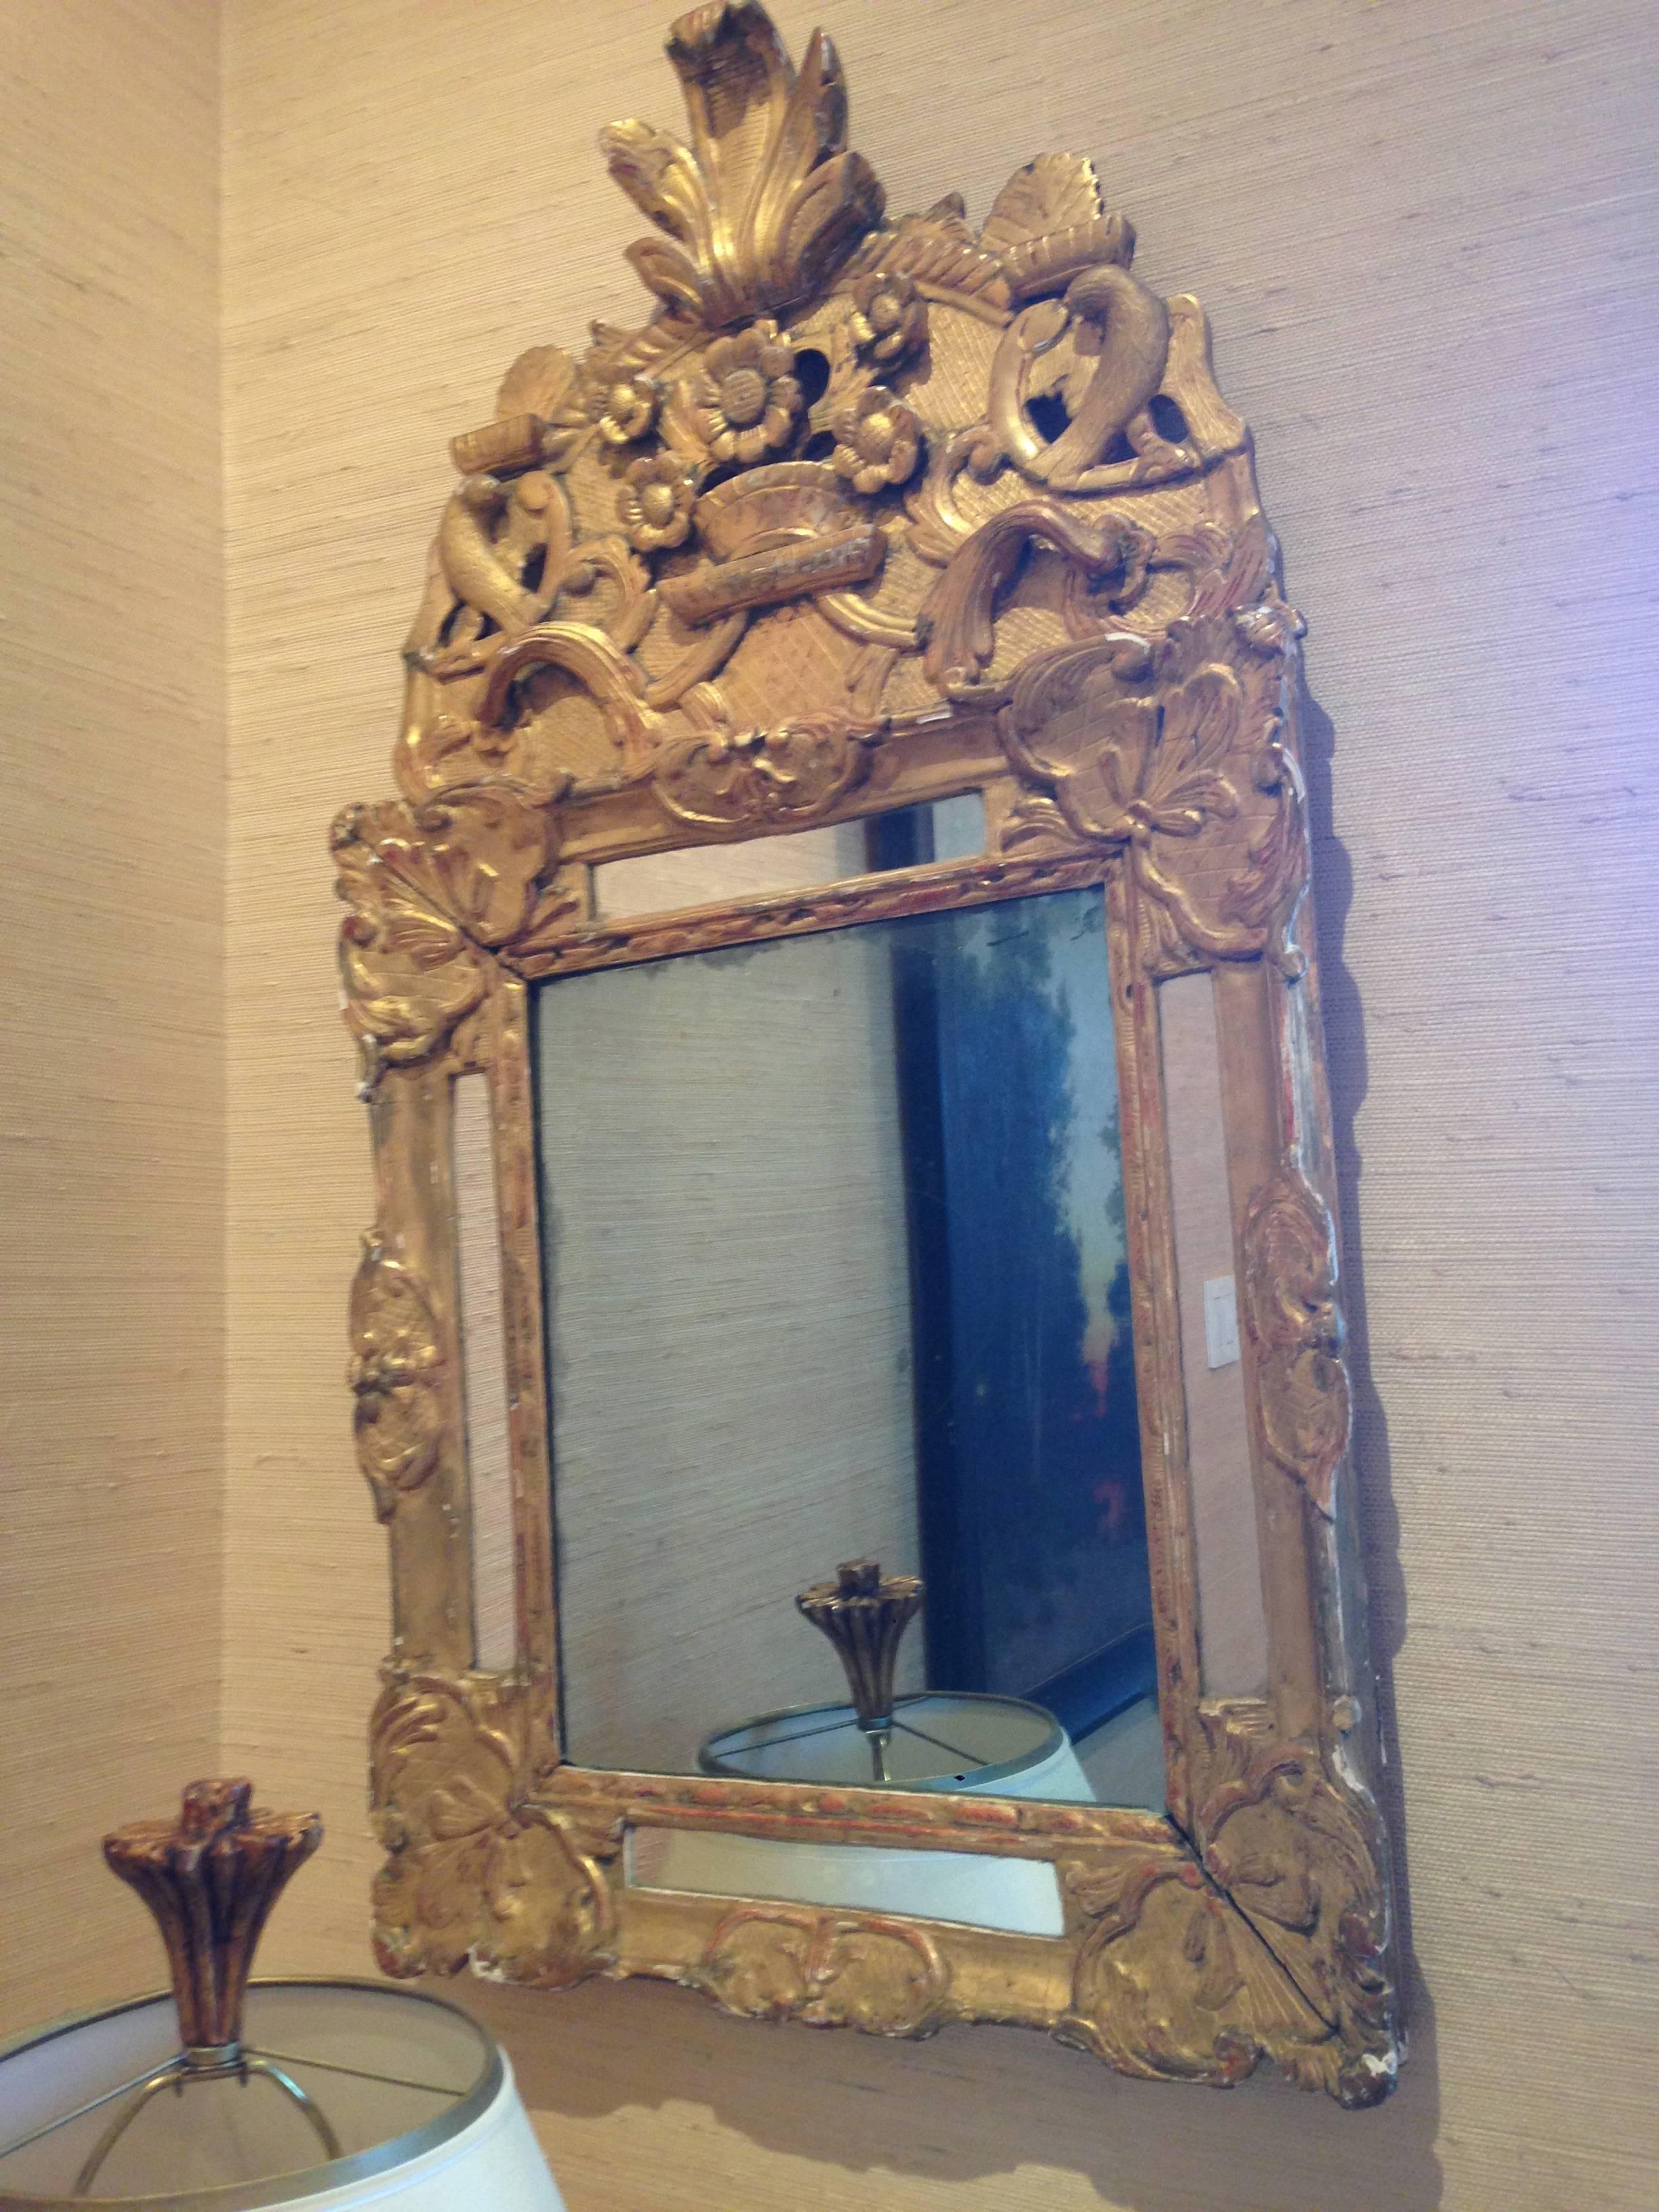 Beautiful early 18th century French Regence giltwood mirror featuring inset mirrored panels and topped by flower basket and acanthus leaf carvings, circa 1710.